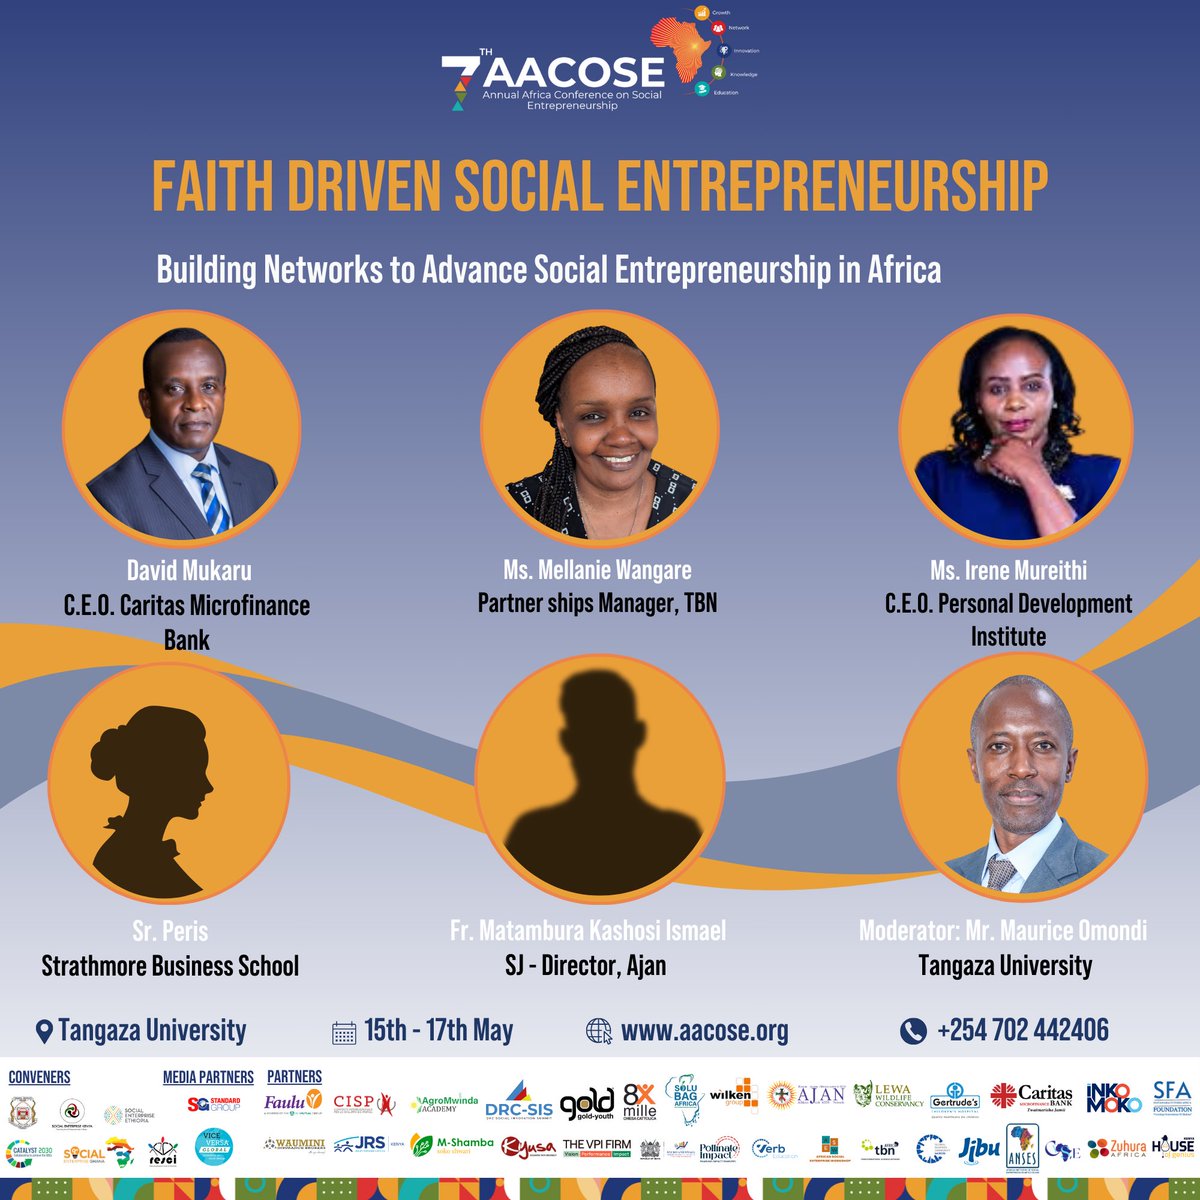 Join us for our breakout room sessions: Advancing Climate Innovation, Healthcare for All, Legal Frameworks, and Faith-Driven Entrepreneurship. Explore solutions shaping Africa's future. #SocialInnovation #AfricaLeadership  #AACOSE7 #AACOSEWeek #socialentrepreneurship #changemaker